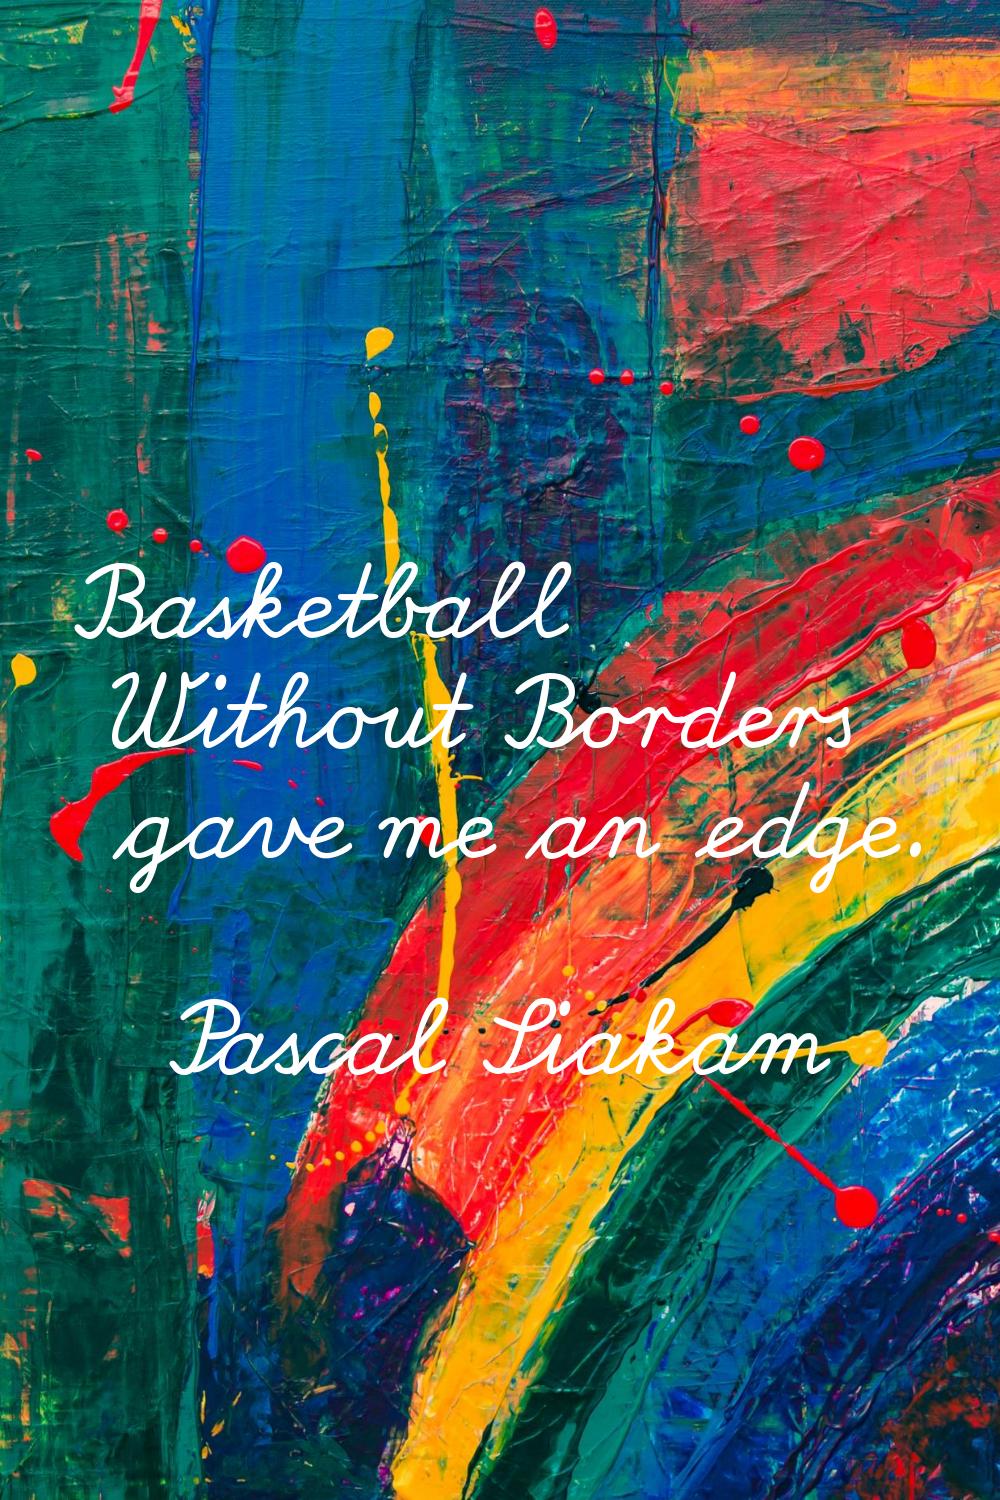 Basketball Without Borders gave me an edge.